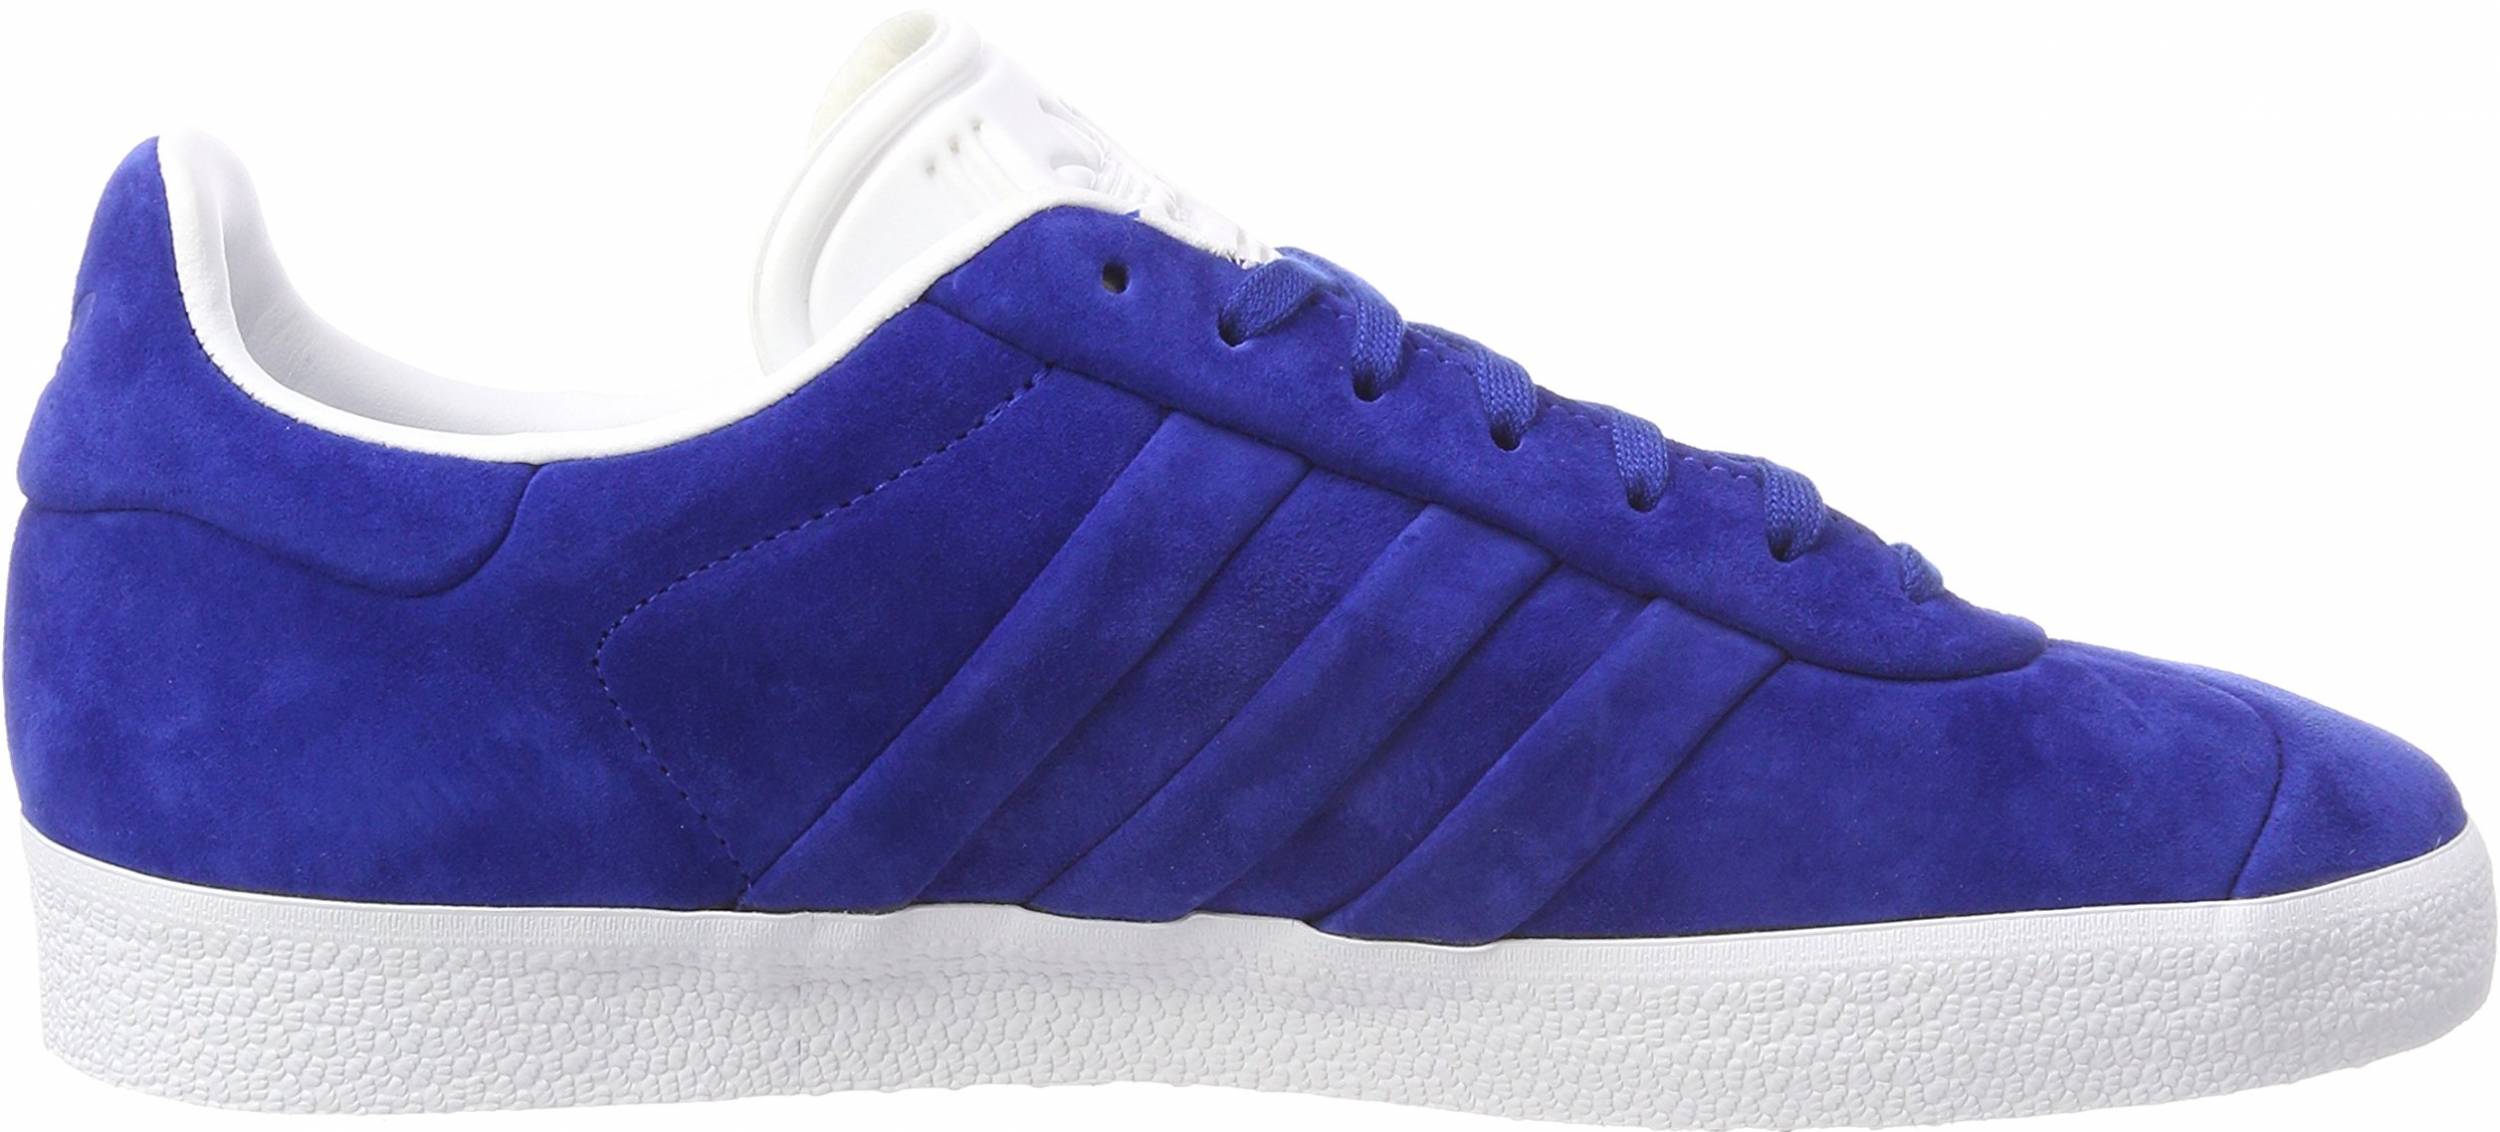 Adidas Gazelle Stitch and Turn sneakers 